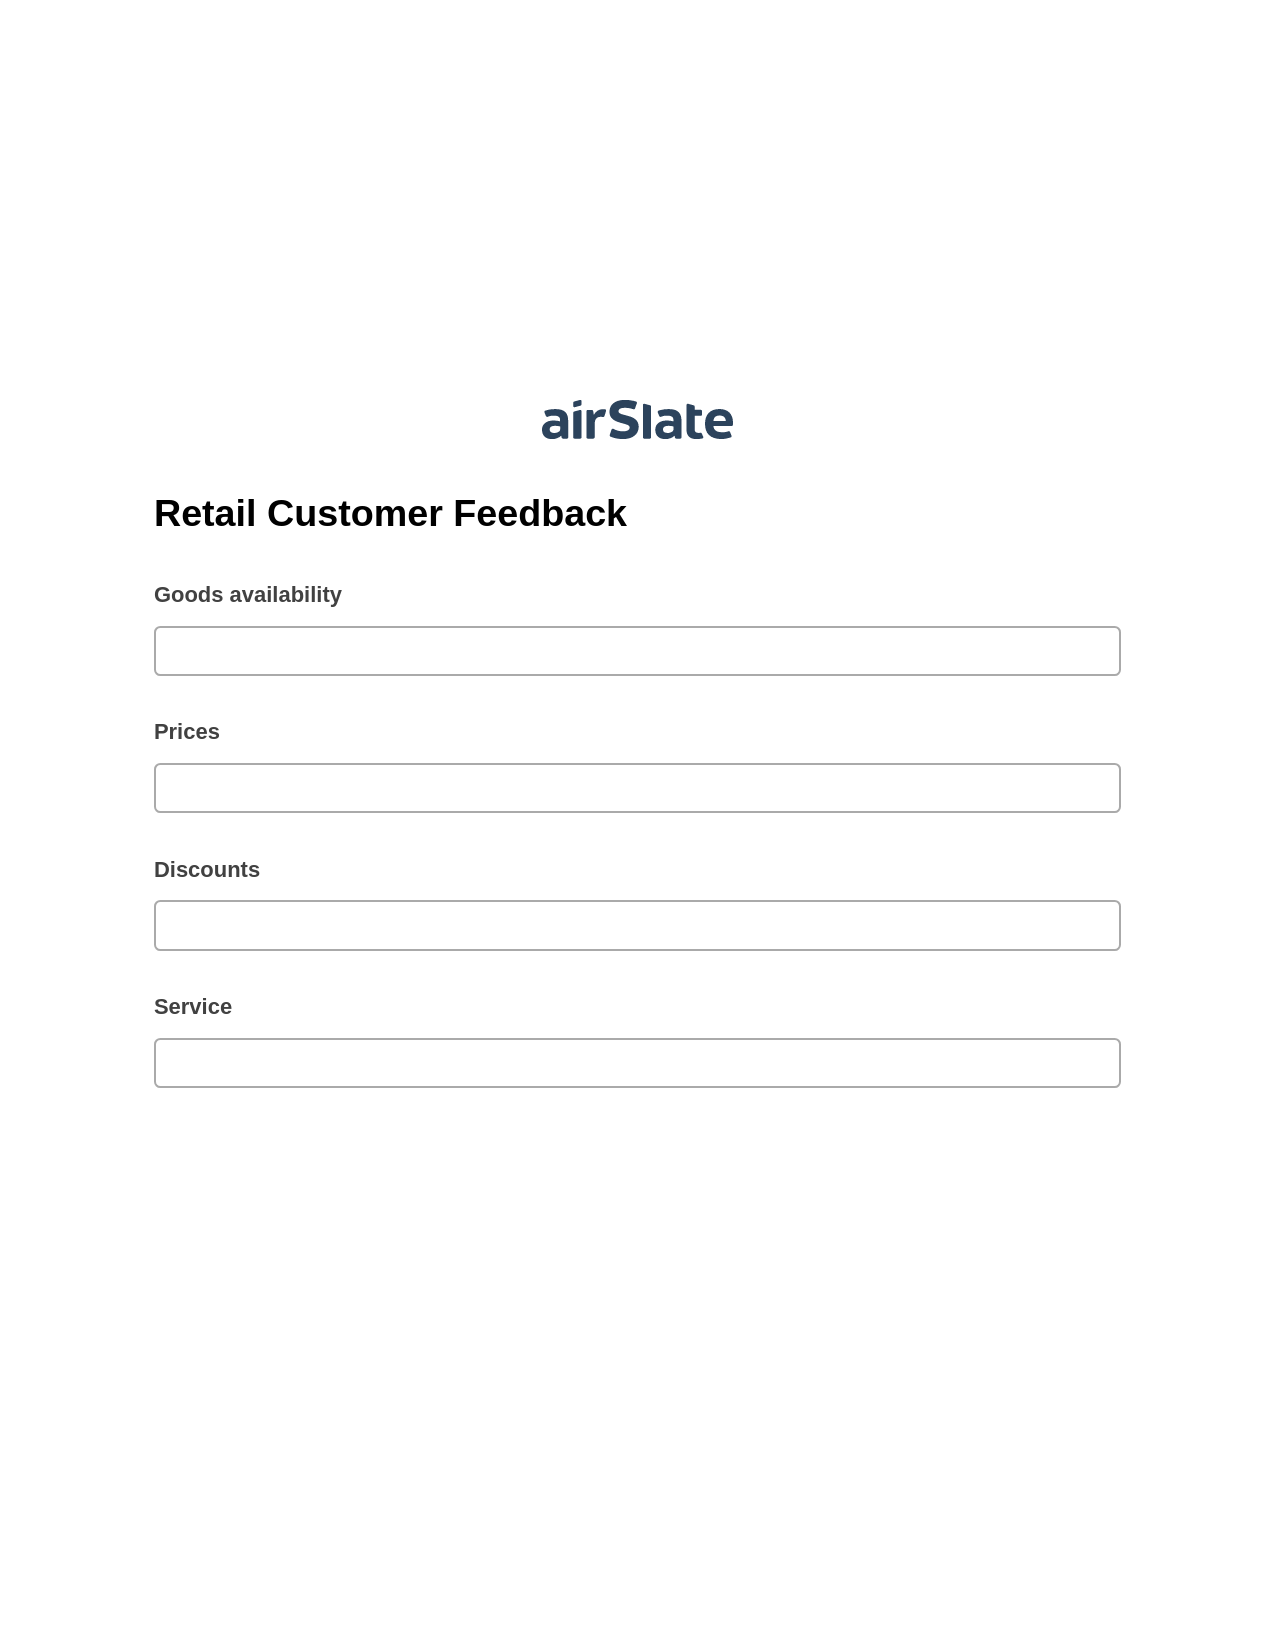 Multirole Retail Customer Feedback Pre-fill from CSV File Bot, Lock the slate bot, Export to NetSuite Record Bot